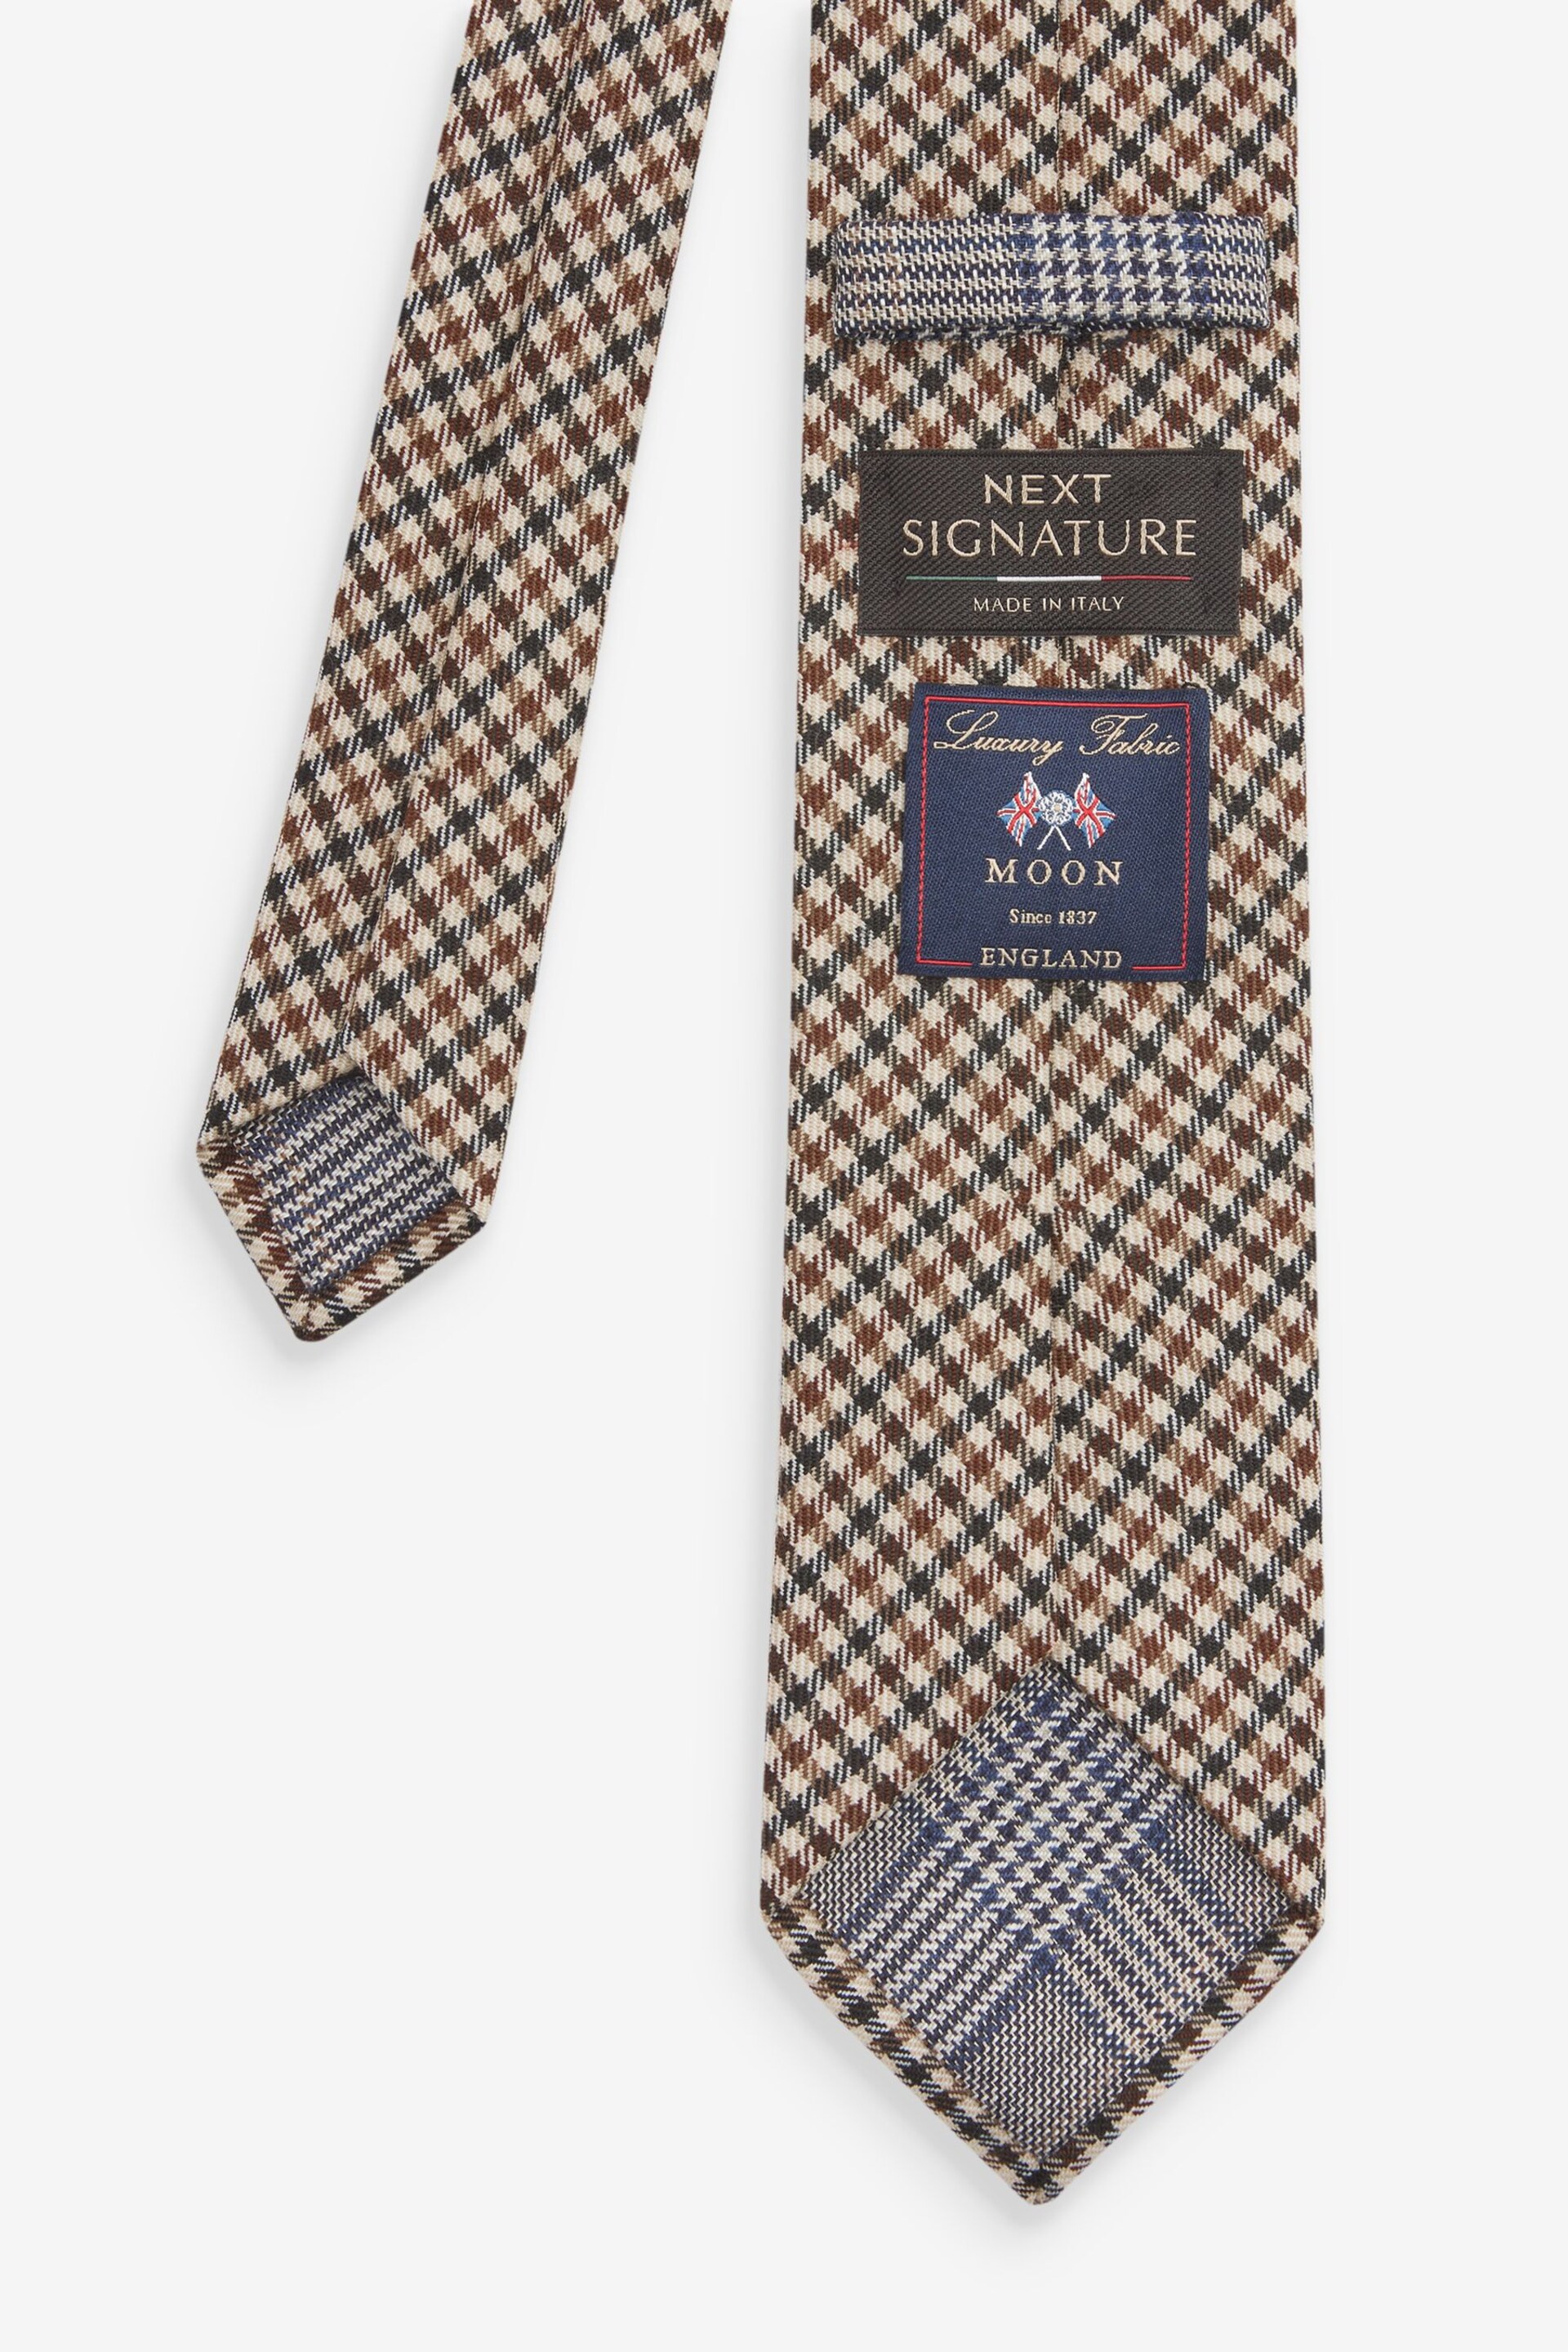 Brown Neutral Gingham Check Signature Abraham Moon And Sons Tie - Image 3 of 3